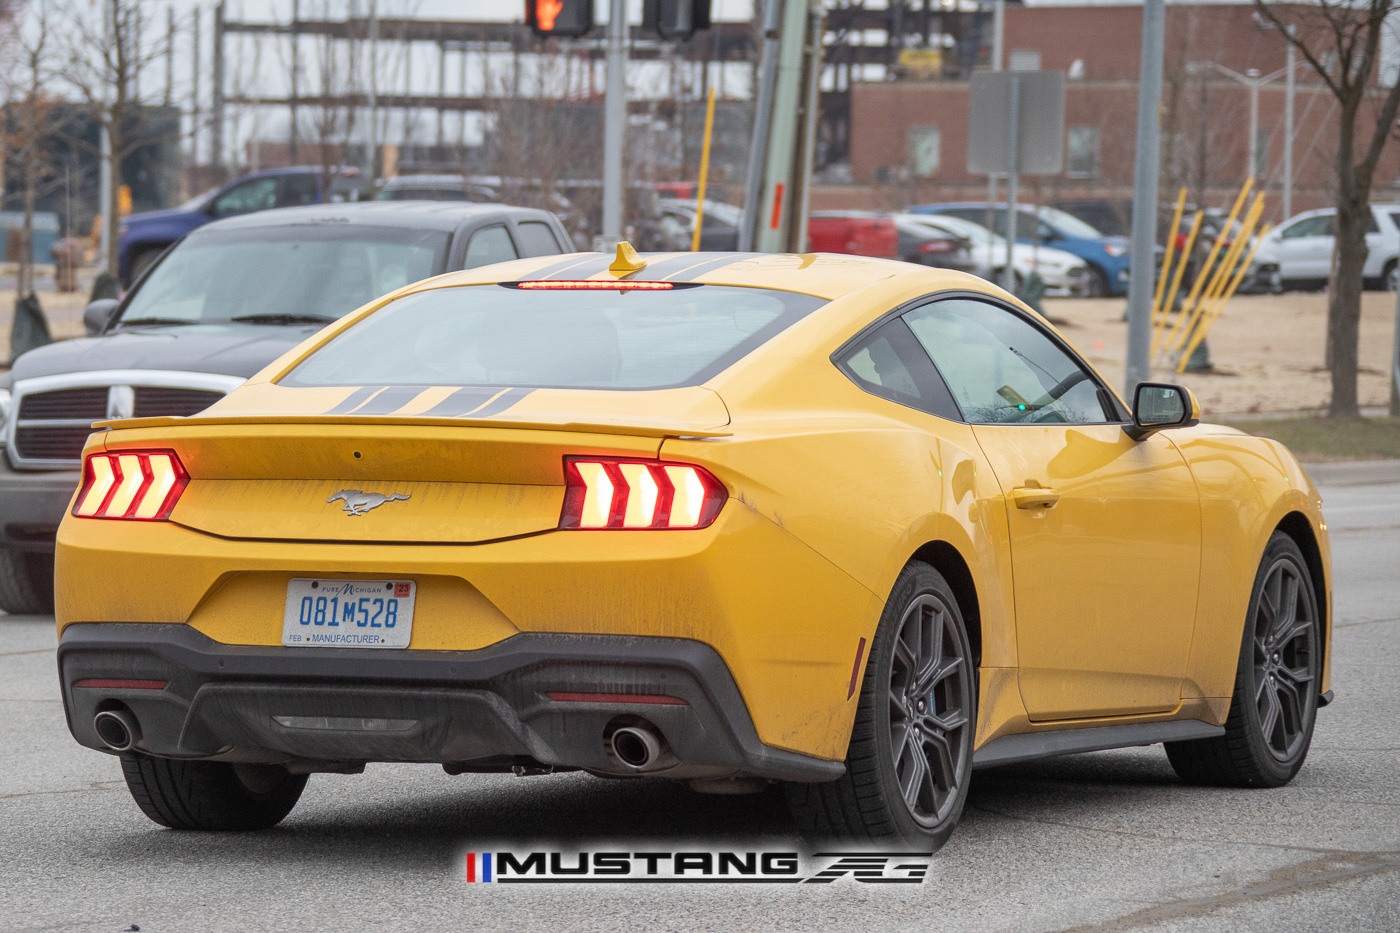 S650 Mustang Racing Stripes Spied on Yellow Splash 2024 Mustang GT & EcoBoost (S650) 2024-mustang-ecoboost-s650-yellow-splash-racing-stripes-8